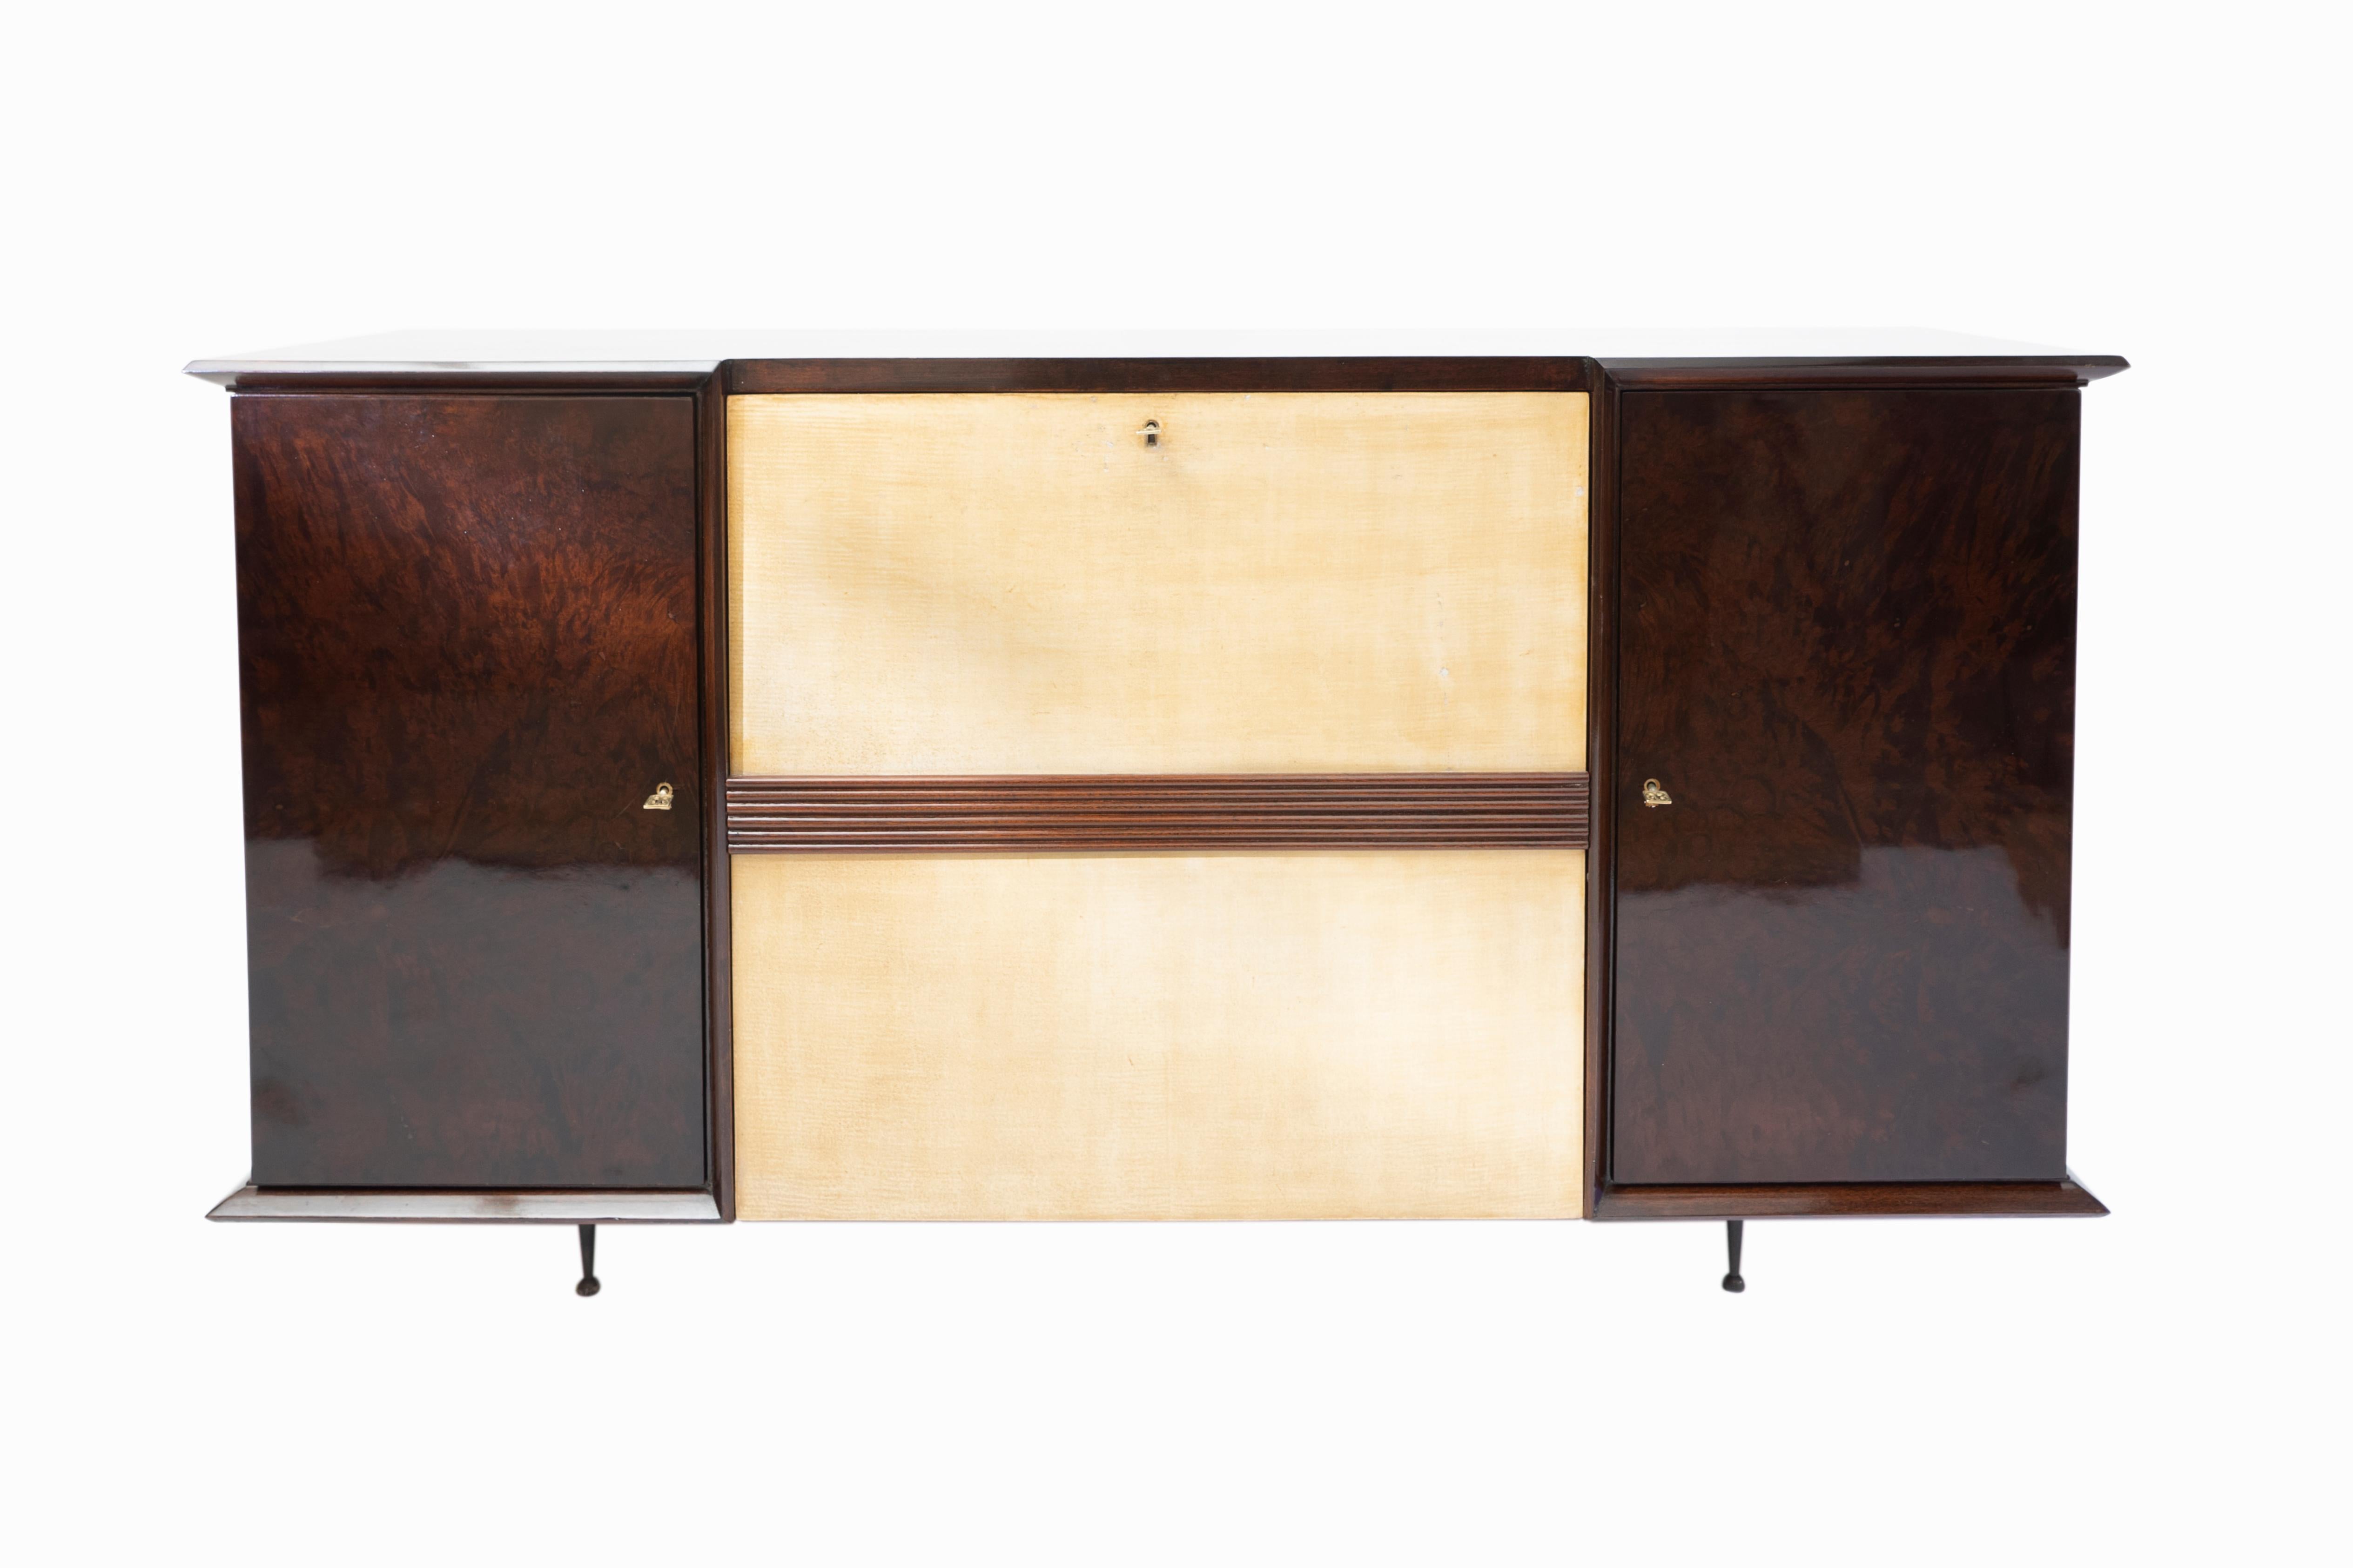 Argentine Wood, Glass, Parchment and Mirror Bar and Cabinet Set by Englander & Bonta, 1950 For Sale